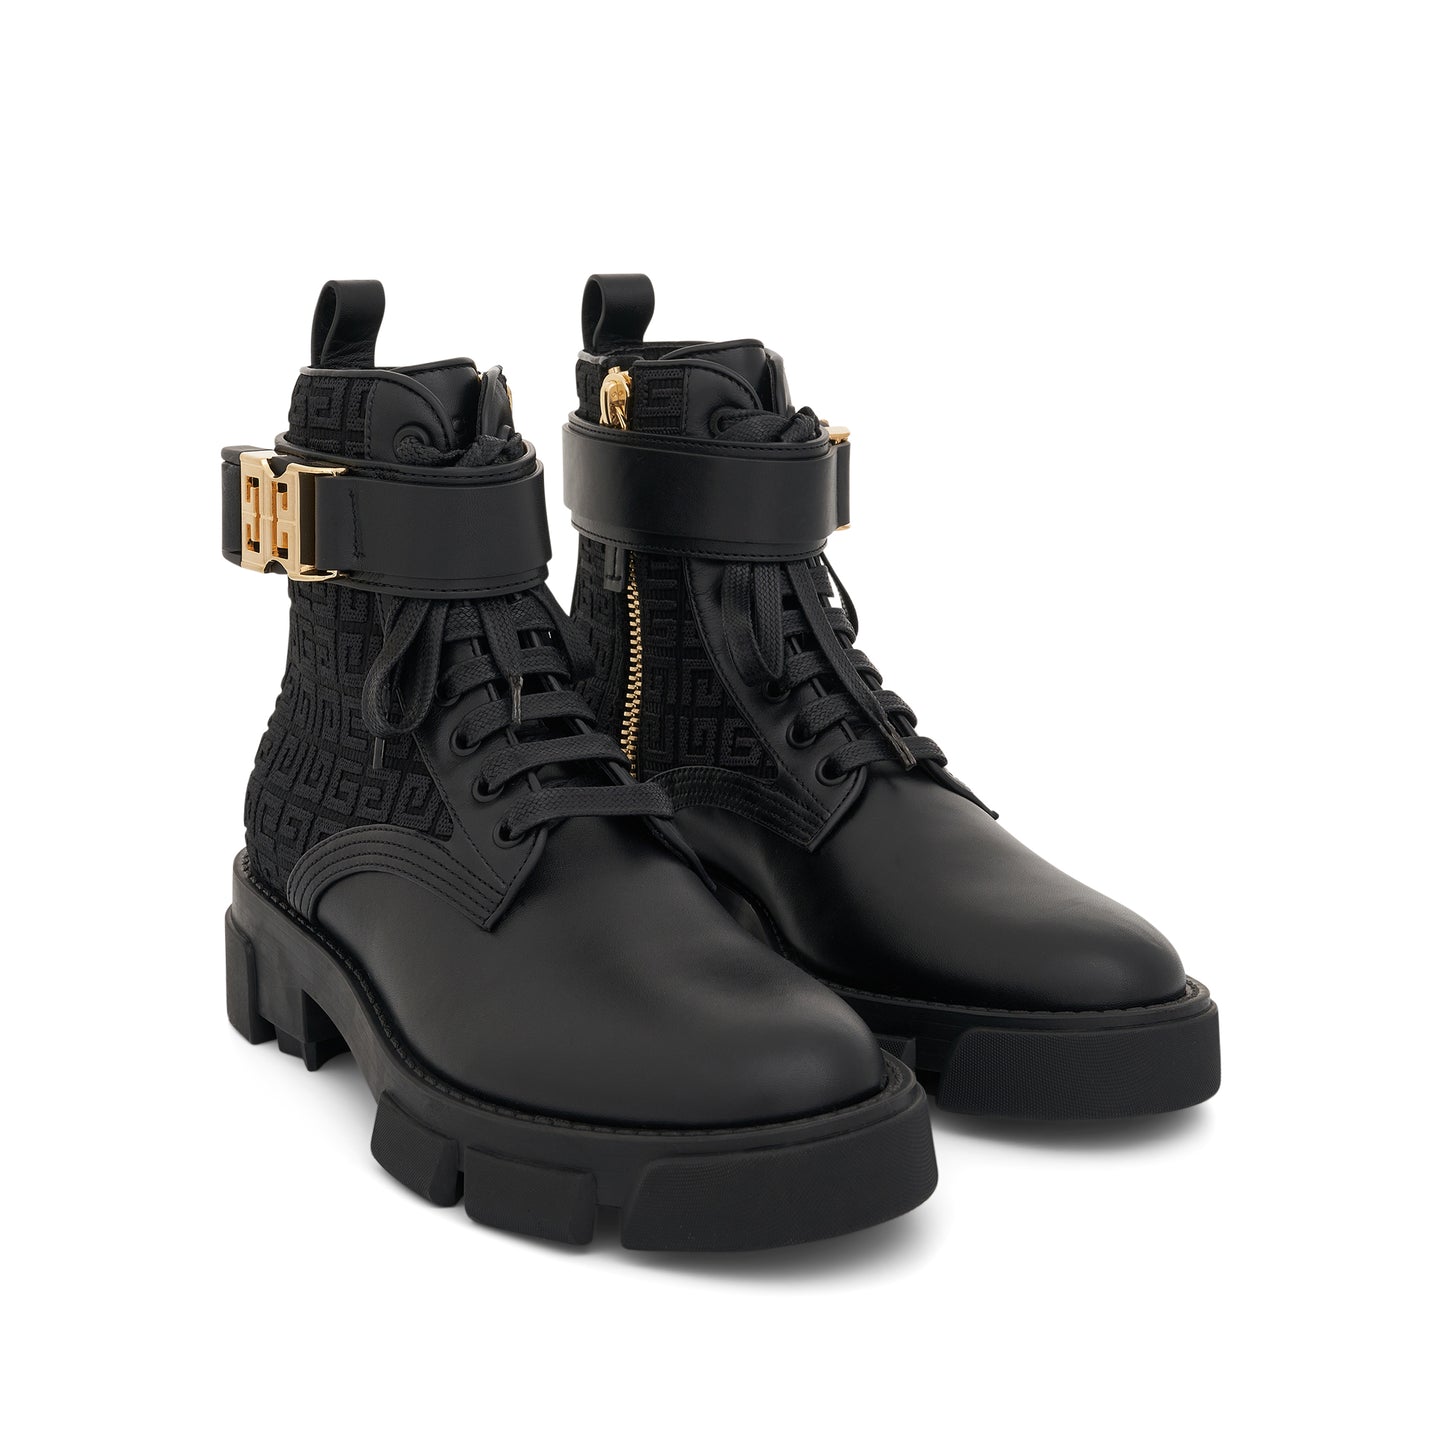 Terra Boot in 4G Embroidered Monogram in Black